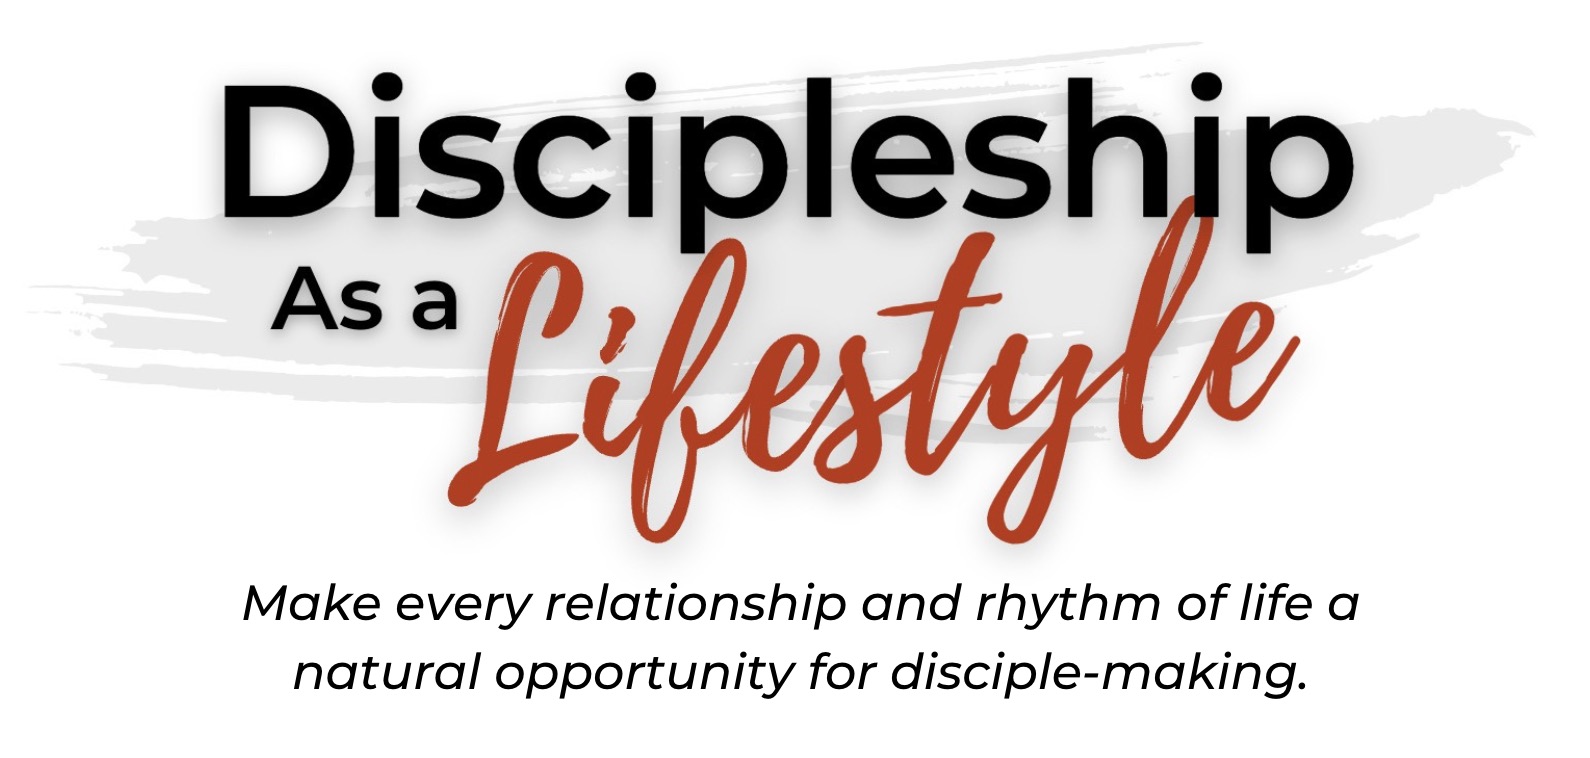 Make every relationship and rhythm of life a natural opportunity for disciple-making.